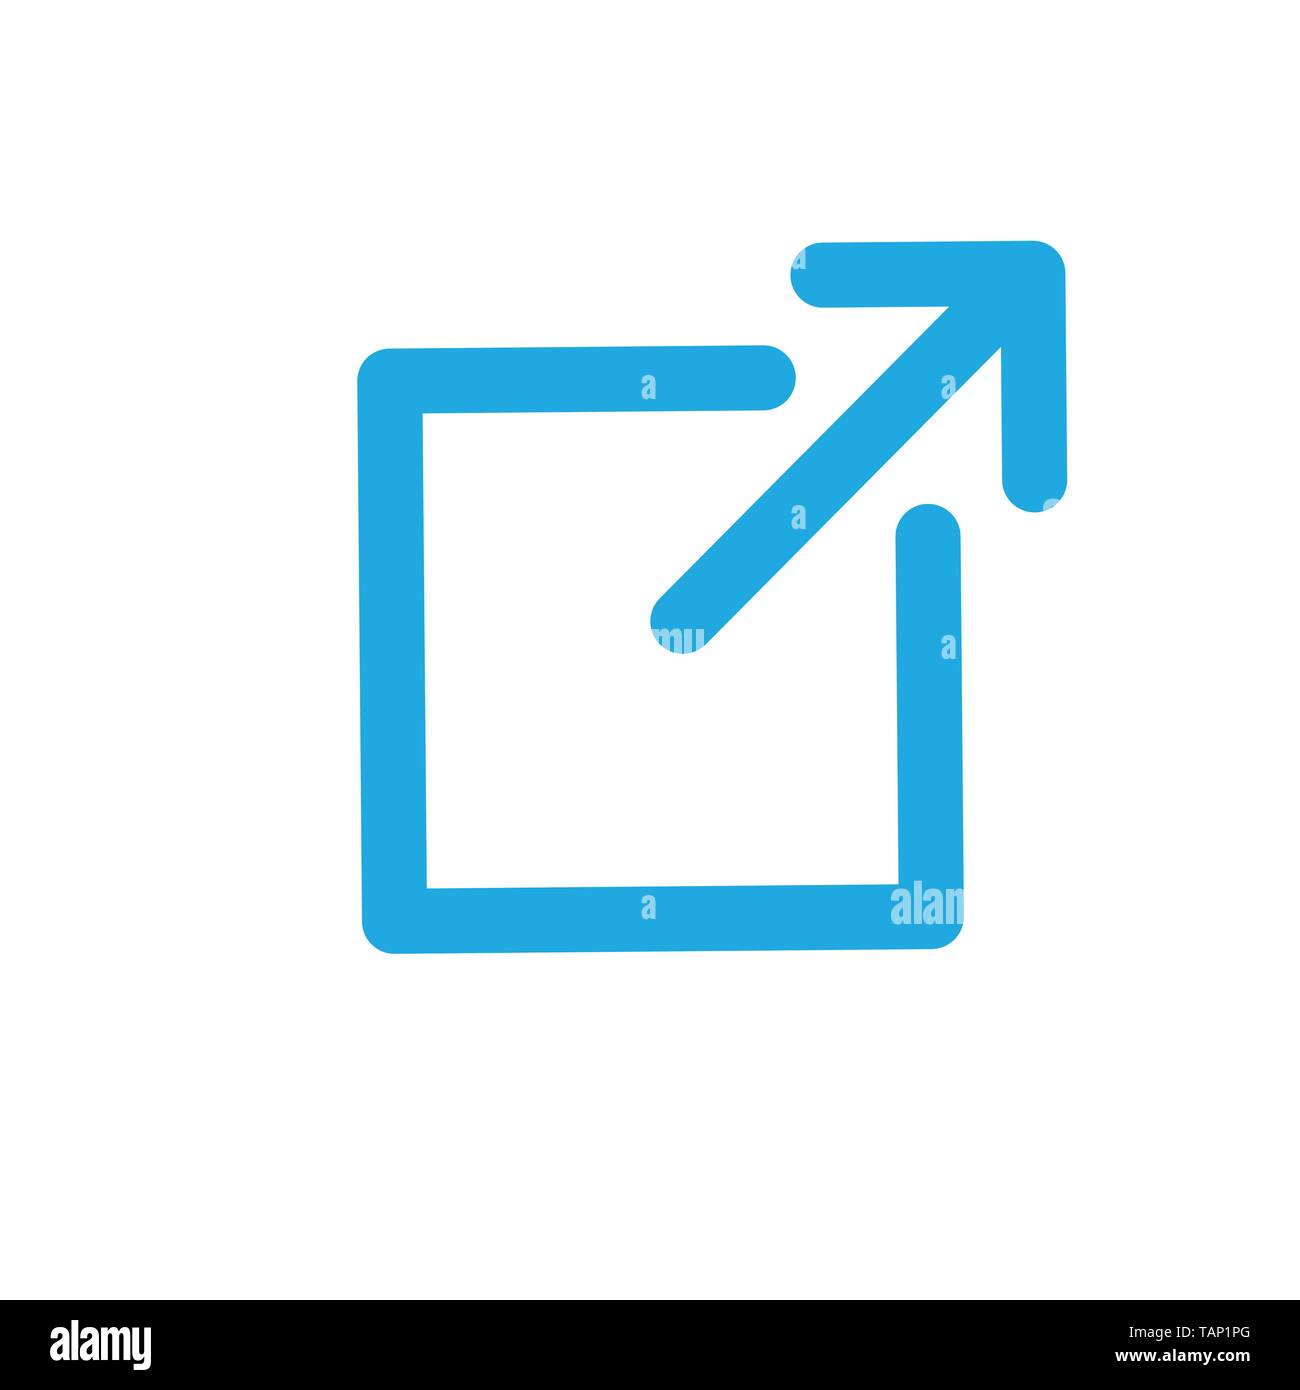 External Link Icon with arrow showing leaving the app to visit an external website Stock Vector